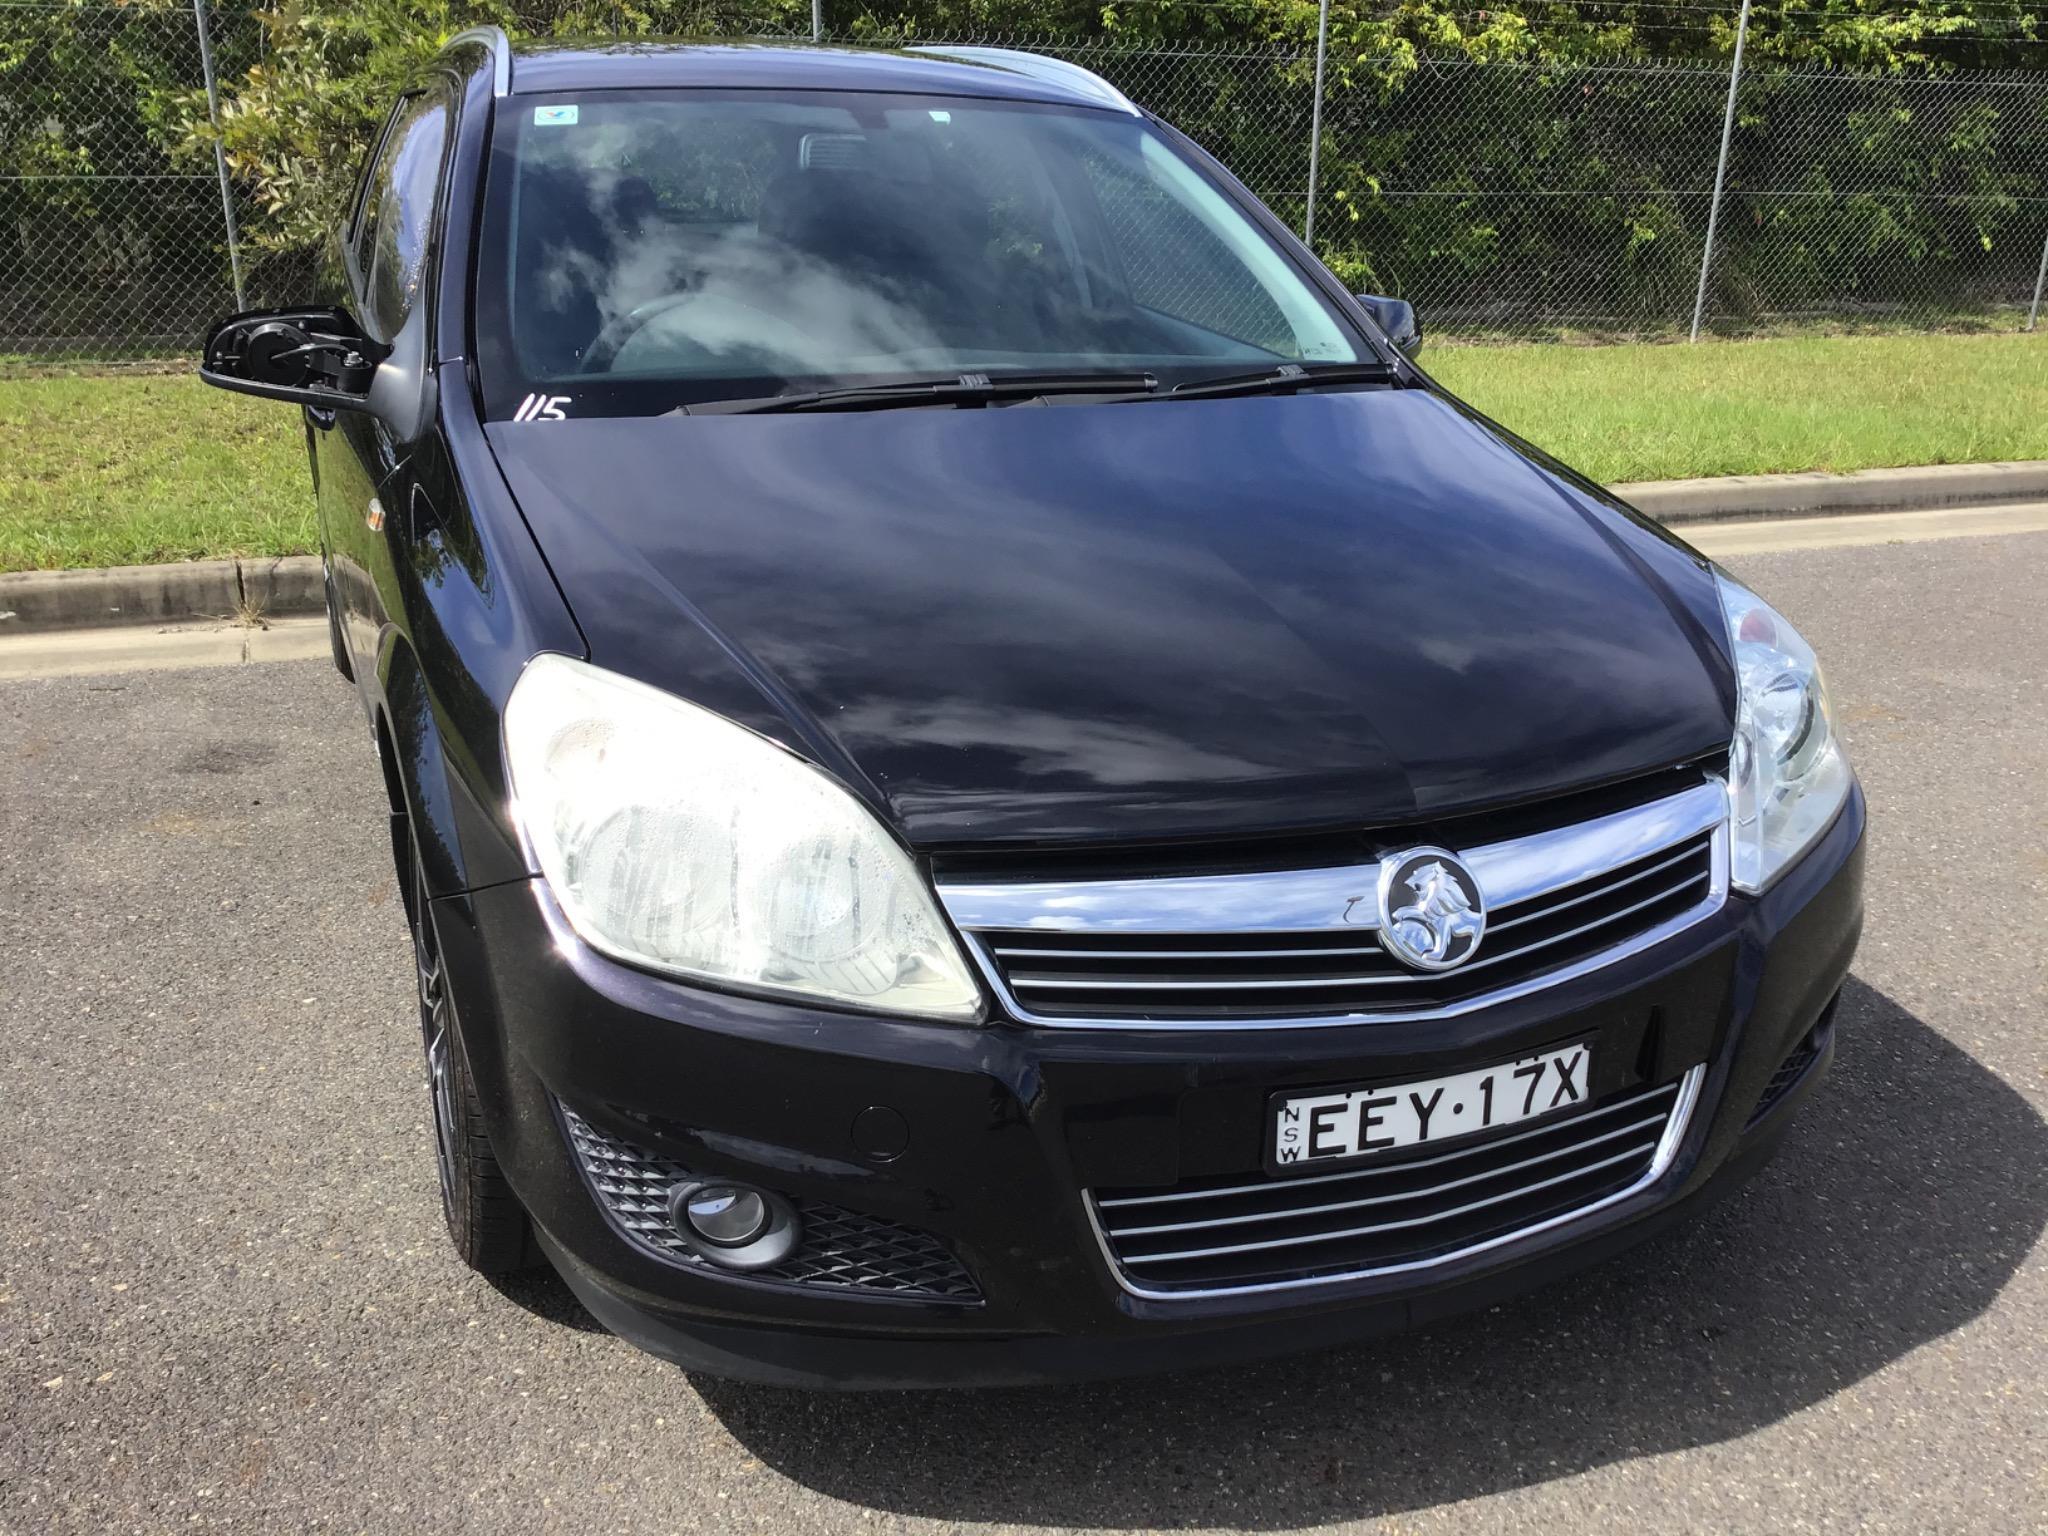 2009 Holden Astra AH CDX Wagon 4dr Auto 4sp 1.8i Picture 8